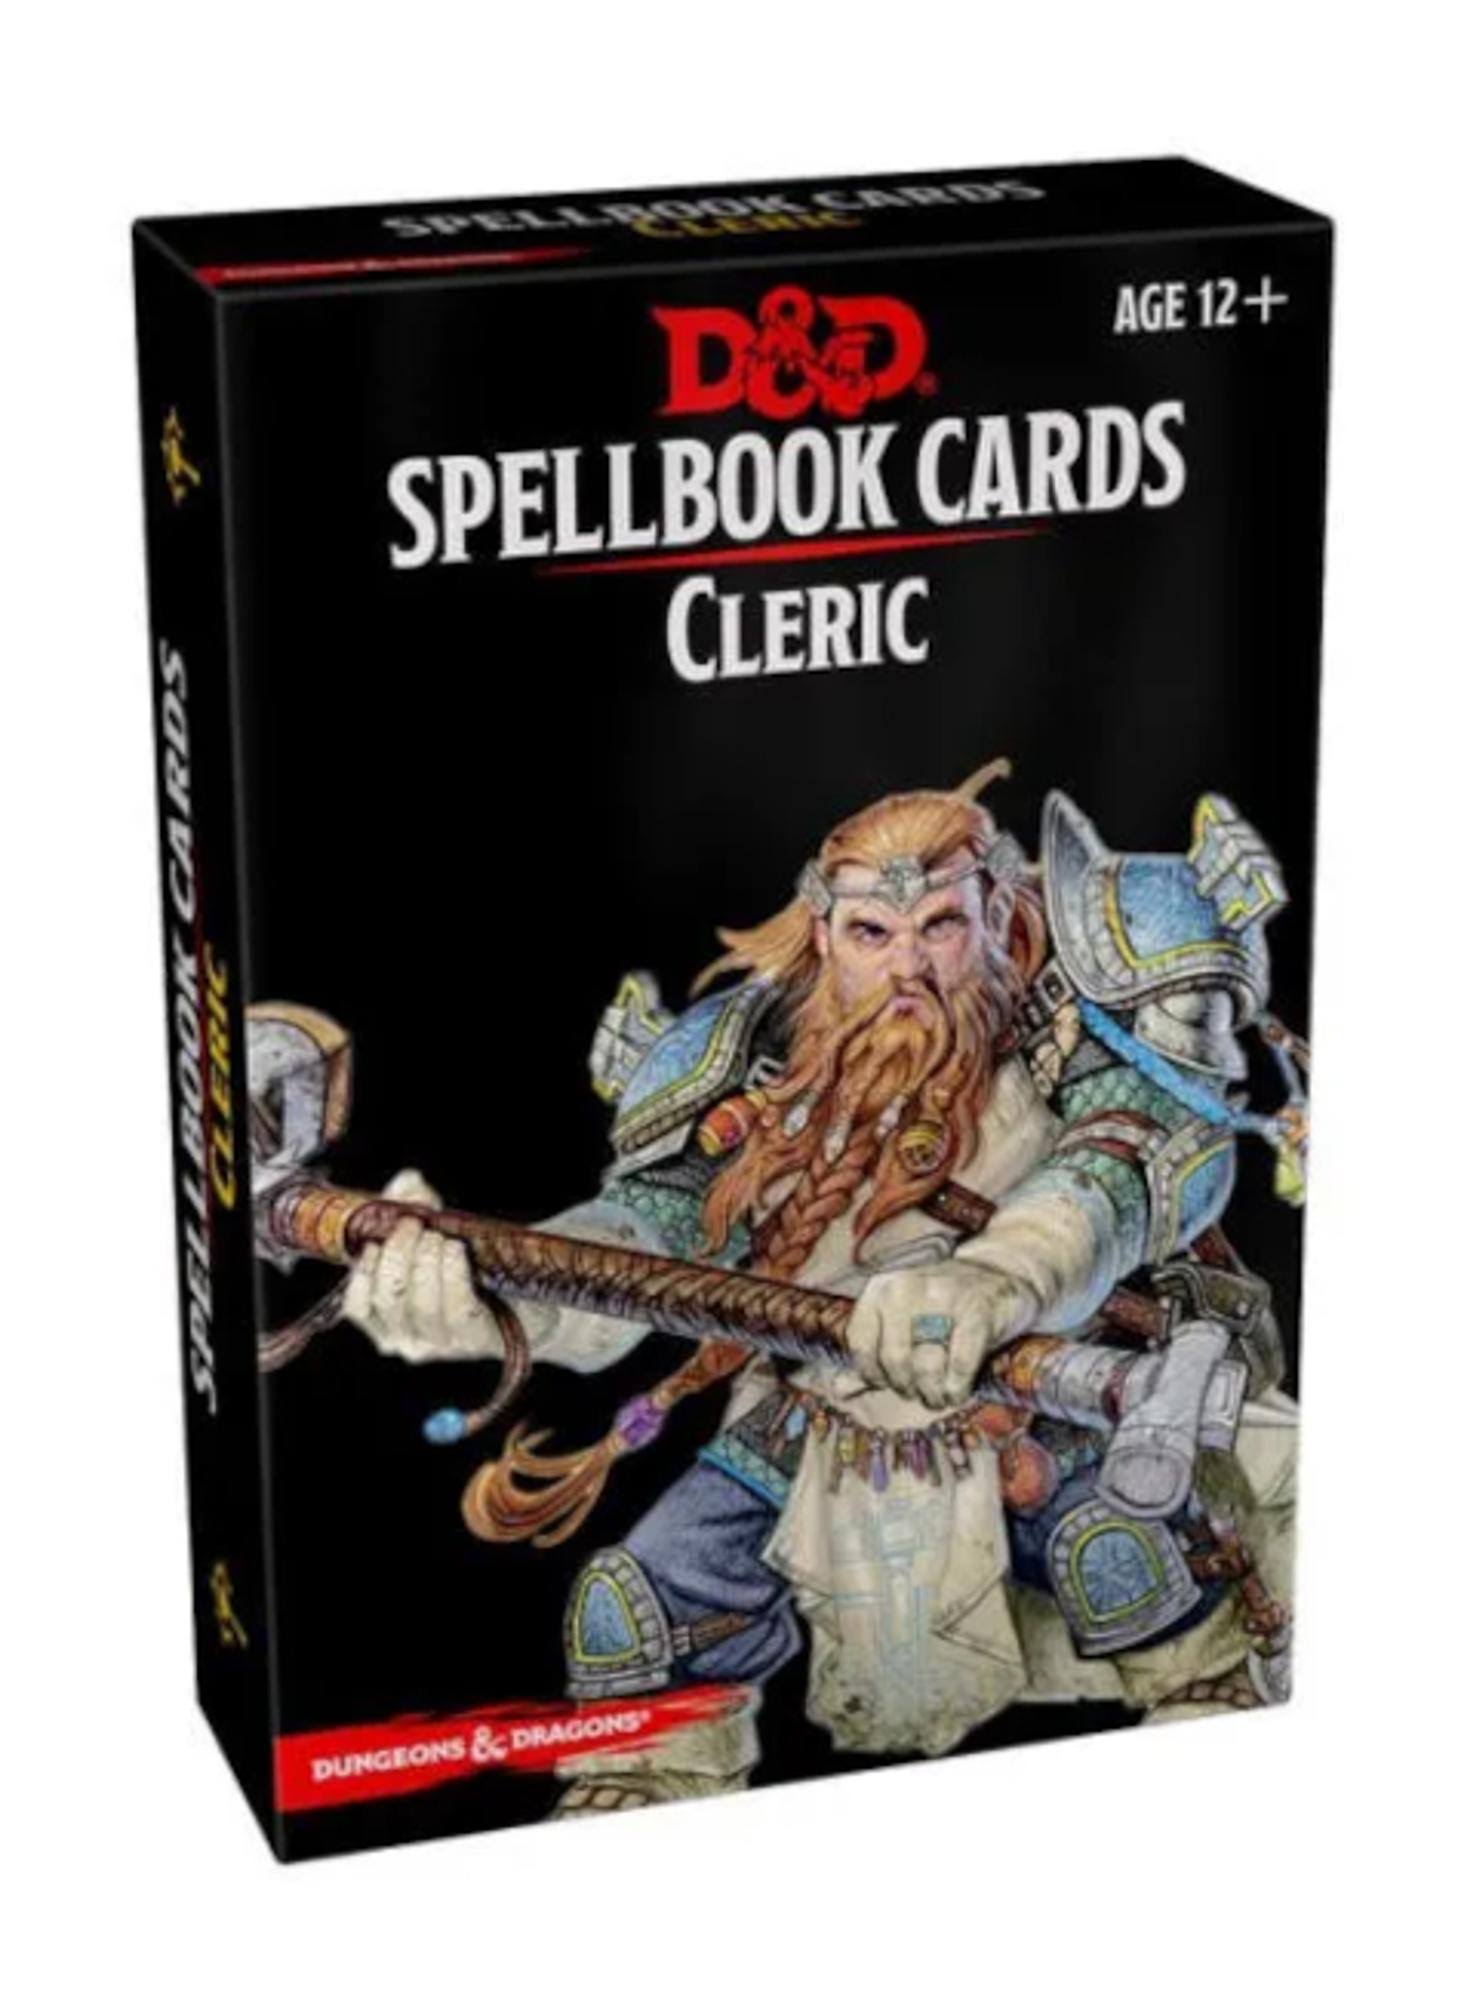 Spellbook Cards: Cleric - Wizards of the Coast